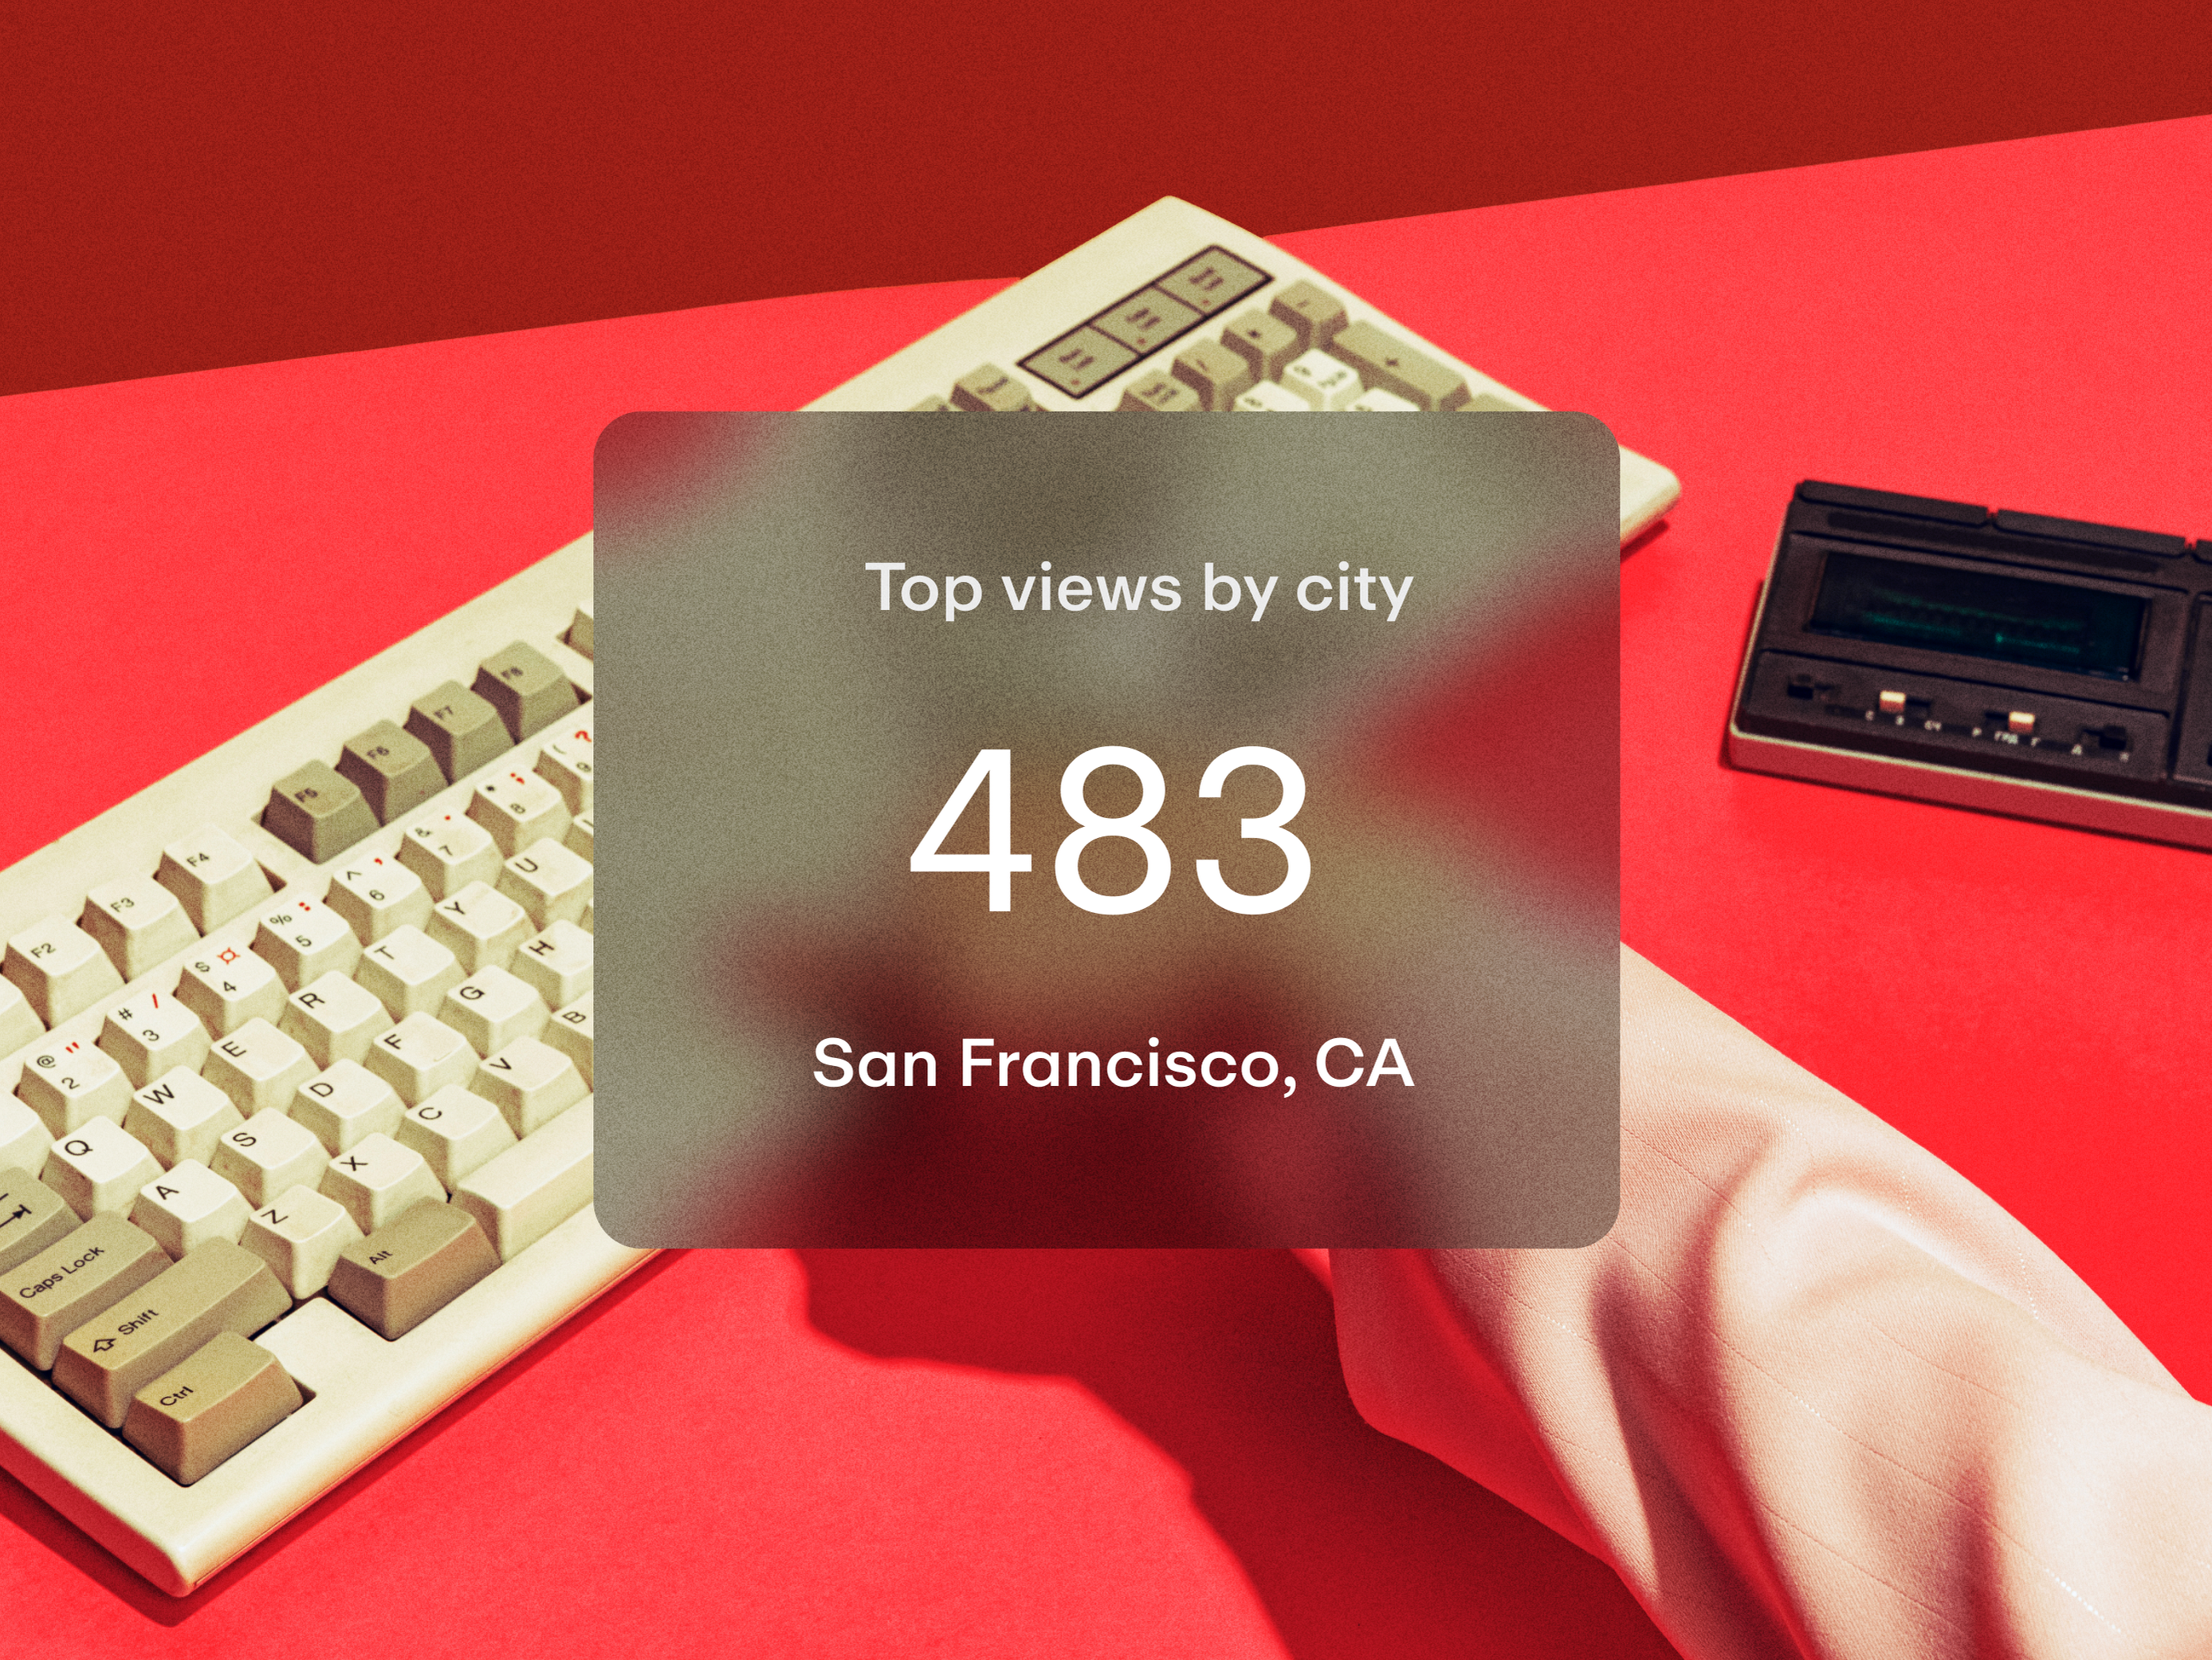 Video analytics for top views by city